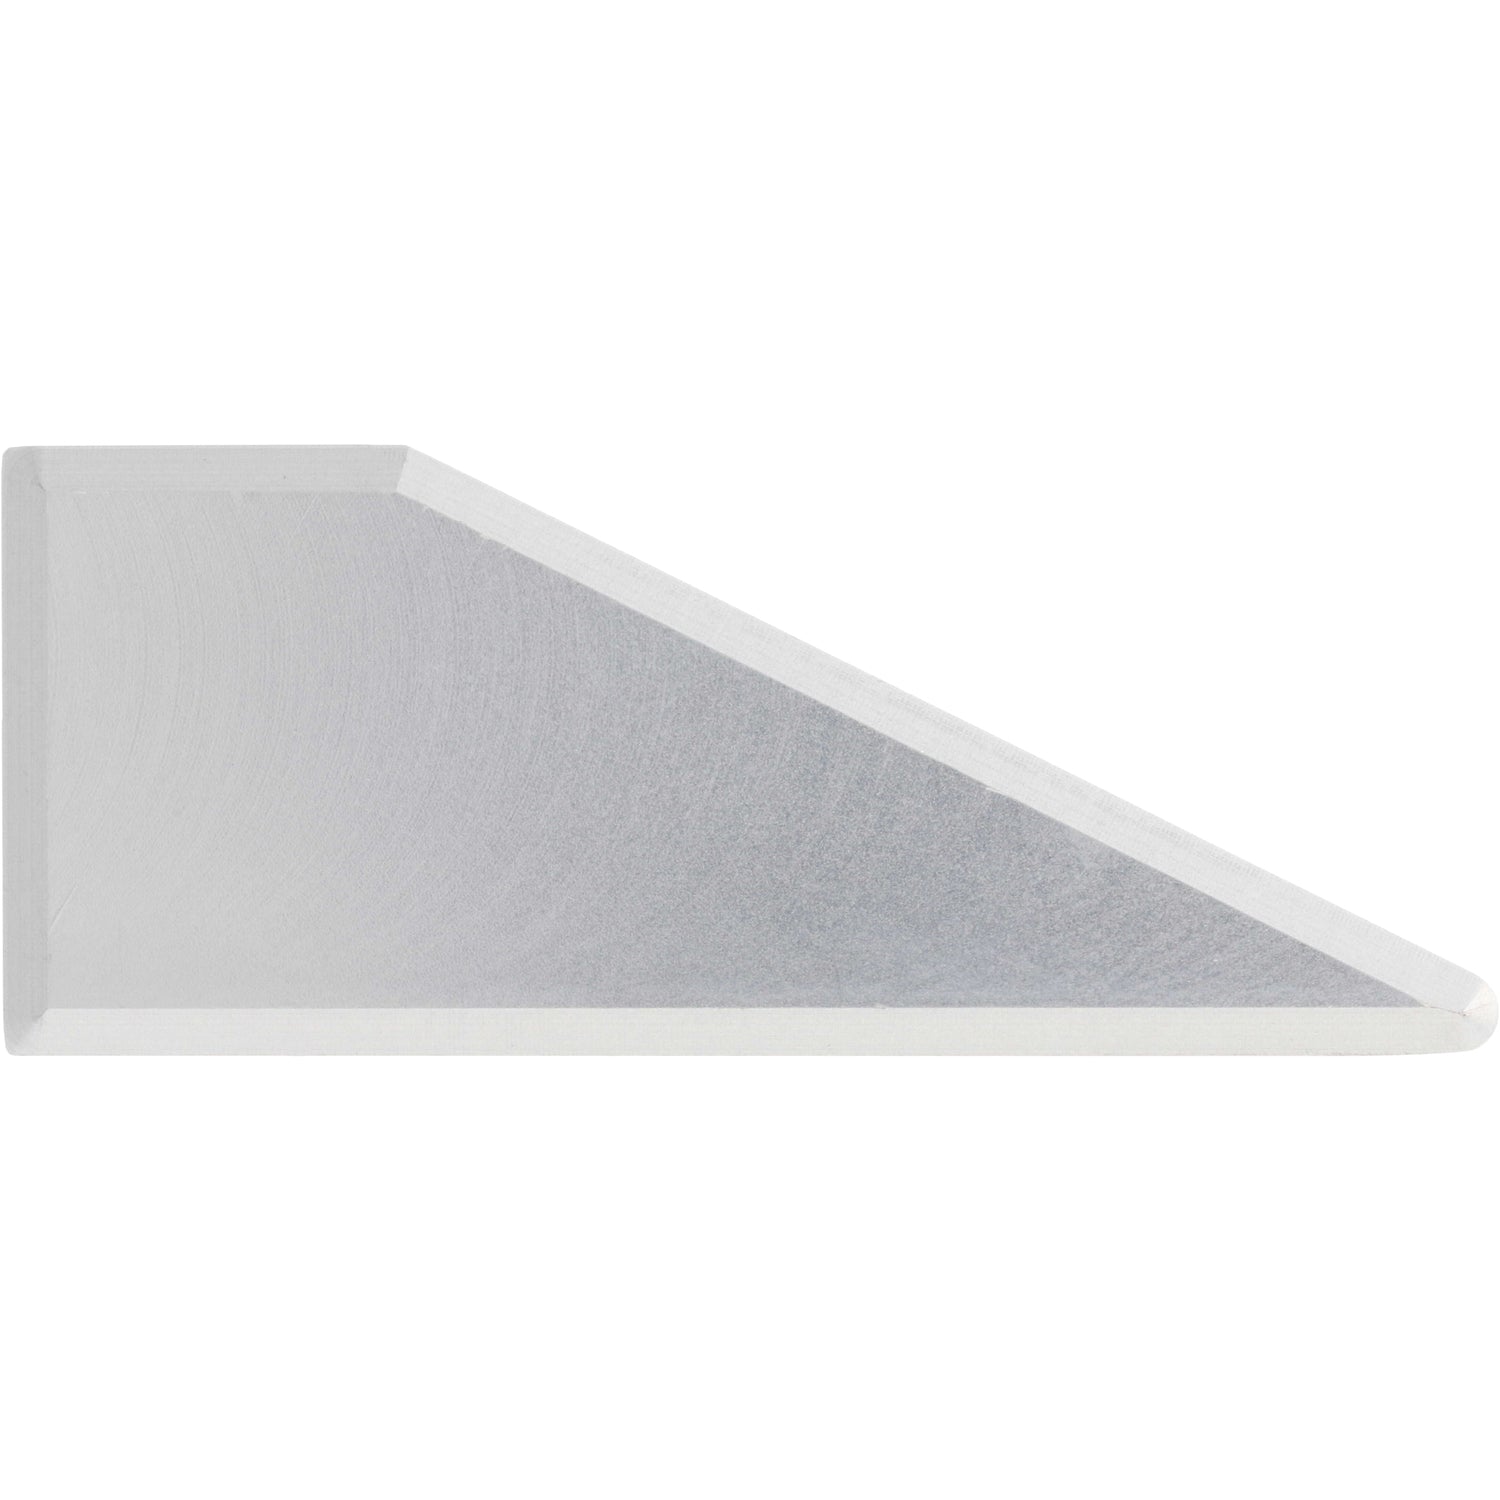 Wedge shaped hard anodized aluminum part with threaded hole on flat surface. Part shown on white background.